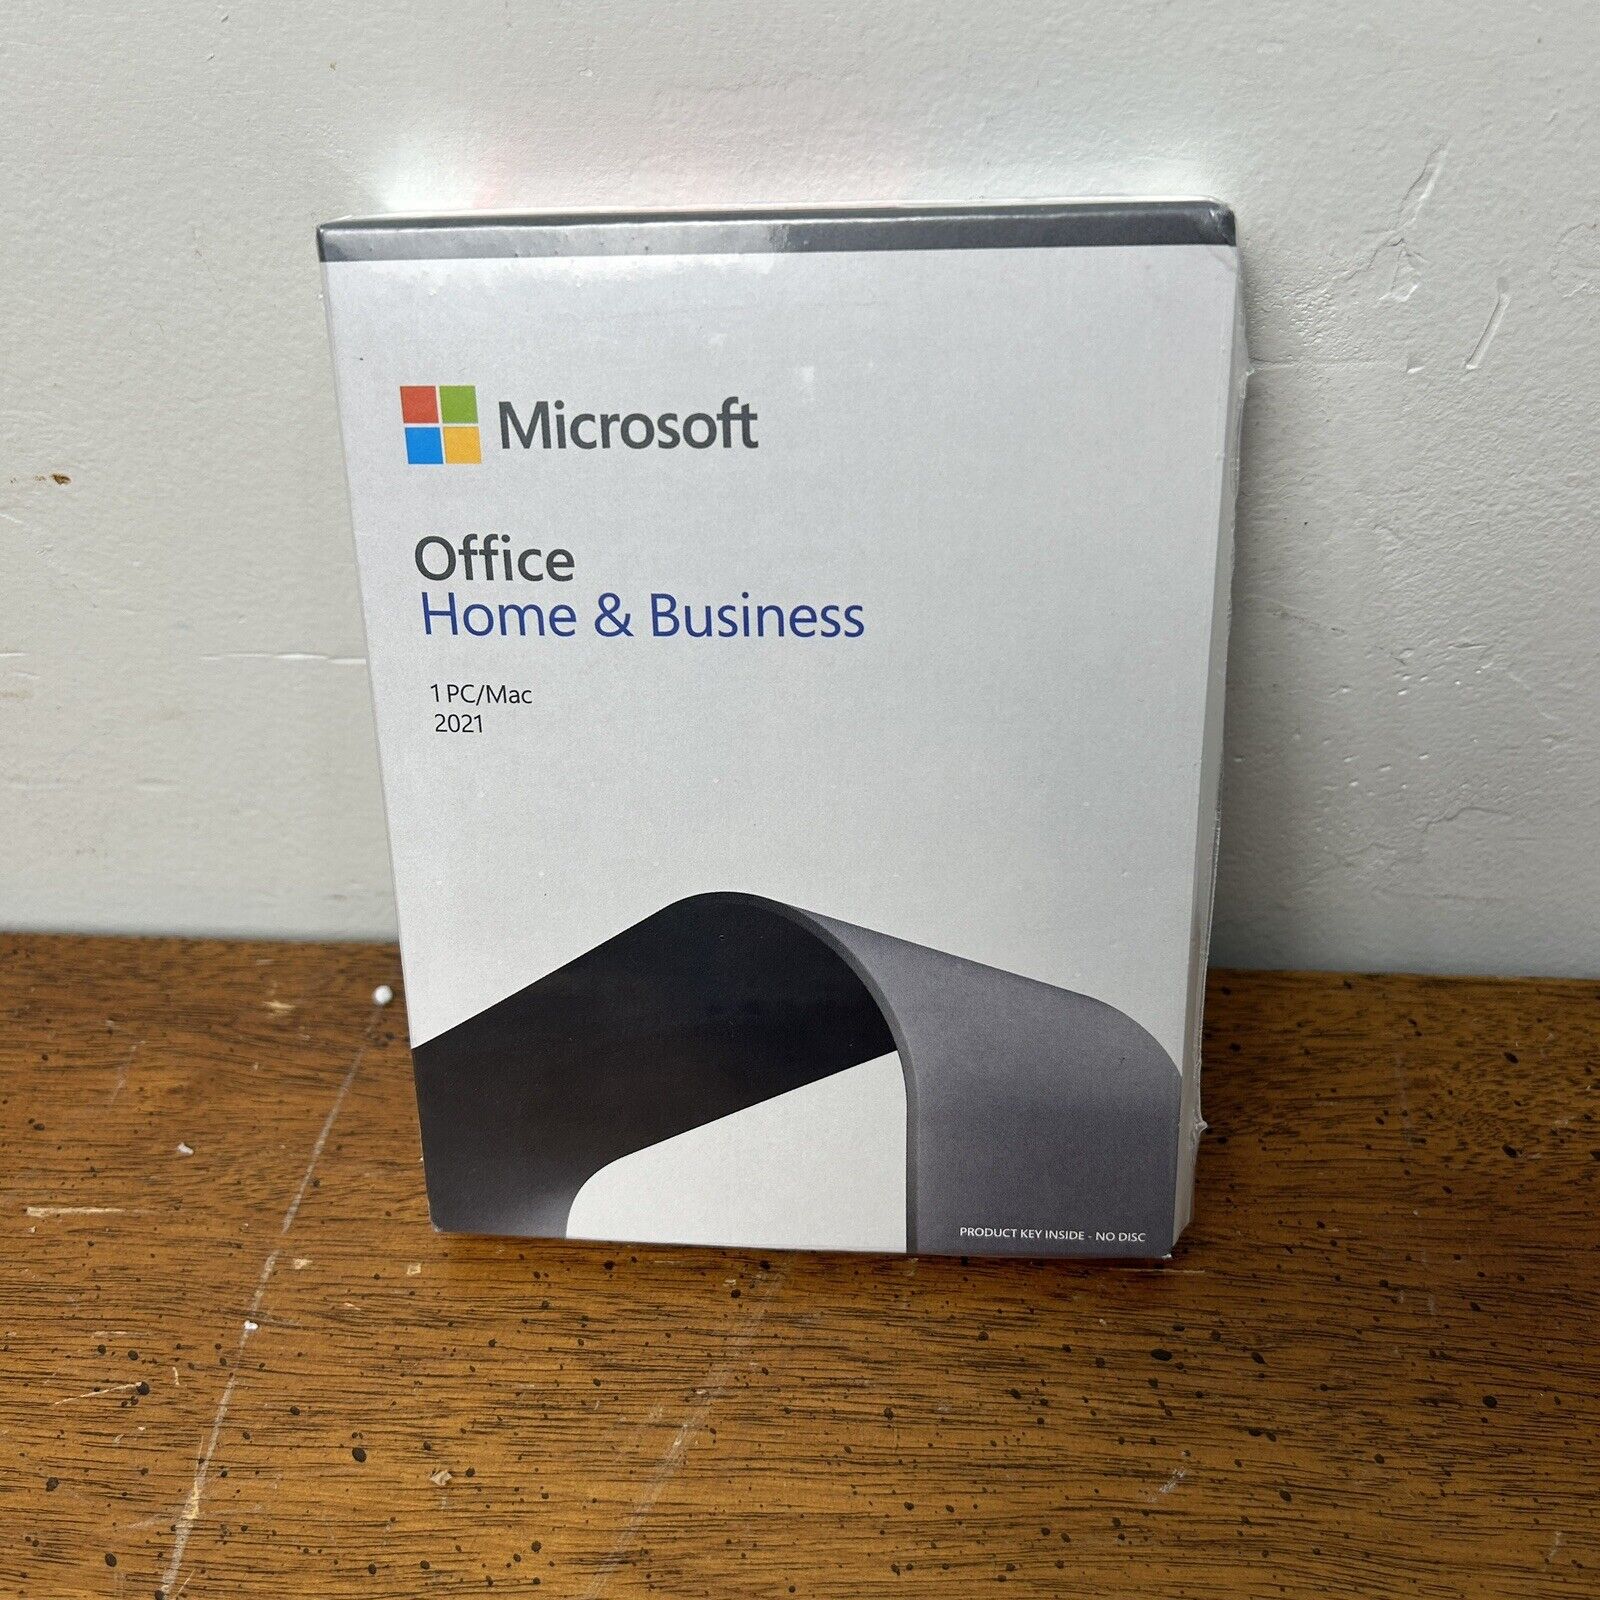 Microsoft Office Home And Business 2021 - One-time purchase for 1 PC or Mac